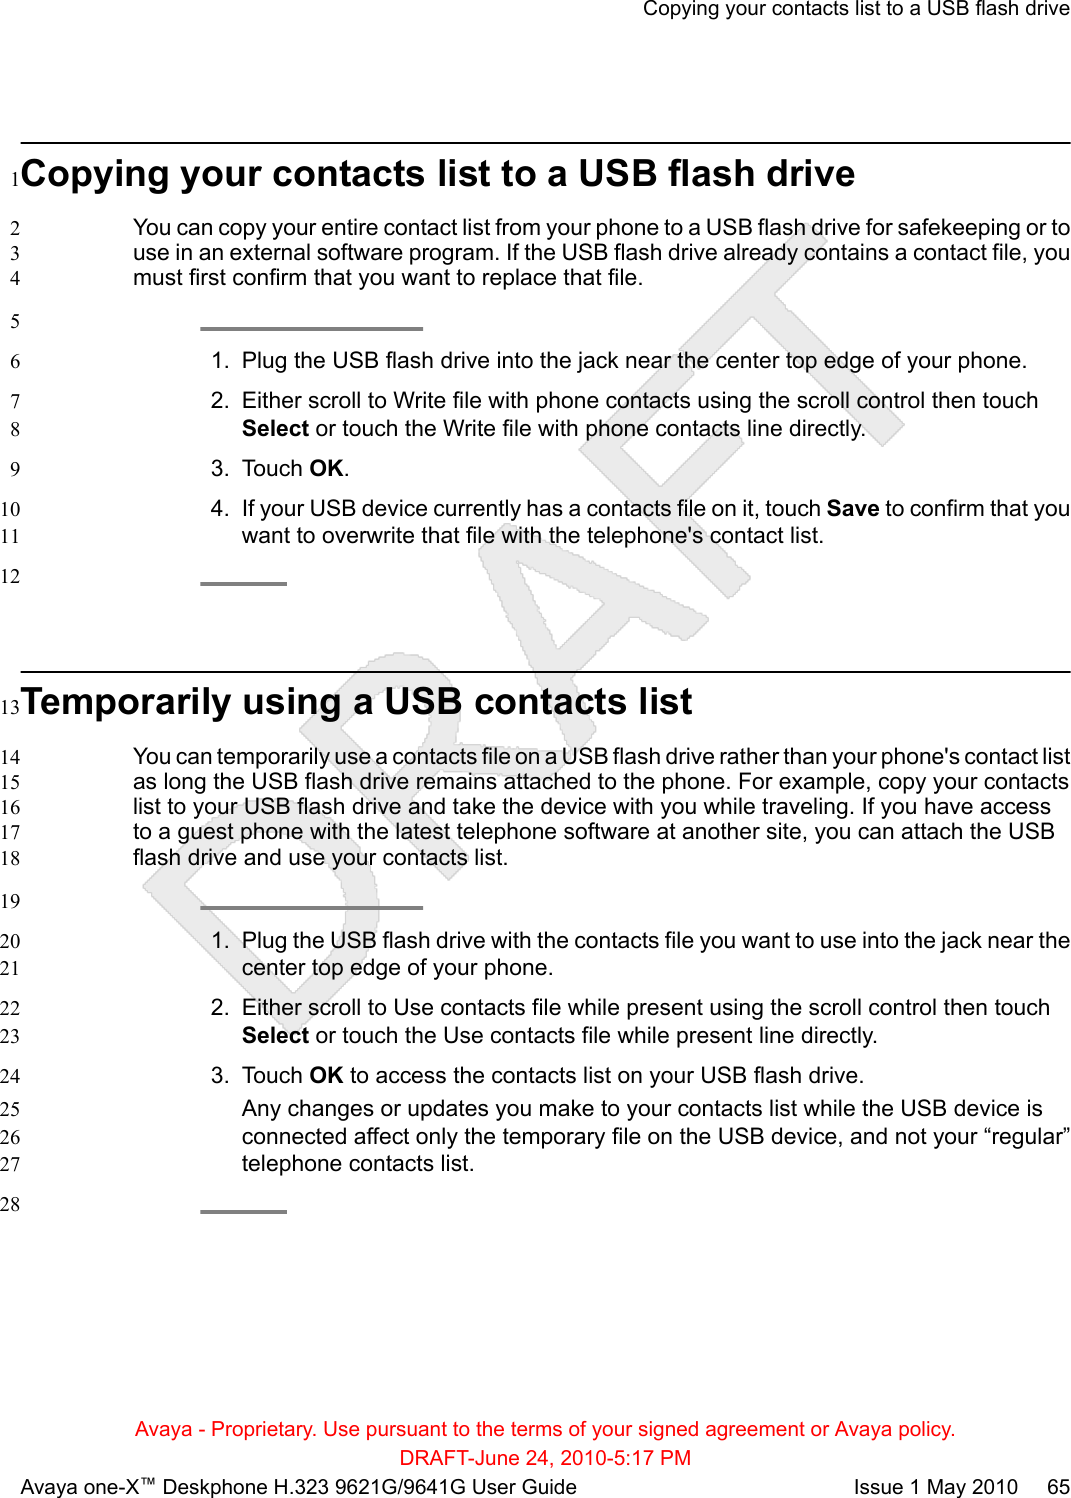 Copying your contacts list to a USB flash drive1You can copy your entire contact list from your phone to a USB flash drive for safekeeping or to2use in an external software program. If the USB flash drive already contains a contact file, you3must first confirm that you want to replace that file.451. Plug the USB flash drive into the jack near the center top edge of your phone.62. Either scroll to Write file with phone contacts using the scroll control then touch7Select or touch the Write file with phone contacts line directly.83. Touch OK.94. If your USB device currently has a contacts file on it, touch Save to confirm that you10want to overwrite that file with the telephone&apos;s contact list.1112Temporarily using a USB contacts list13You can temporarily use a contacts file on a USB flash drive rather than your phone&apos;s contact list14as long the USB flash drive remains attached to the phone. For example, copy your contacts15list to your USB flash drive and take the device with you while traveling. If you have access16to a guest phone with the latest telephone software at another site, you can attach the USB17flash drive and use your contacts list.18191. Plug the USB flash drive with the contacts file you want to use into the jack near the20center top edge of your phone.212. Either scroll to Use contacts file while present using the scroll control then touch22Select or touch the Use contacts file while present line directly.233. Touch OK to access the contacts list on your USB flash drive.24Any changes or updates you make to your contacts list while the USB device is25connected affect only the temporary file on the USB device, and not your “regular”26telephone contacts list.2728Copying your contacts list to a USB flash driveAvaya - Proprietary. Use pursuant to the terms of your signed agreement or Avaya policy.DRAFT-June 24, 2010-5:17 PMAvaya one-X™ Deskphone H.323 9621G/9641G User Guide Issue 1 May 2010     65